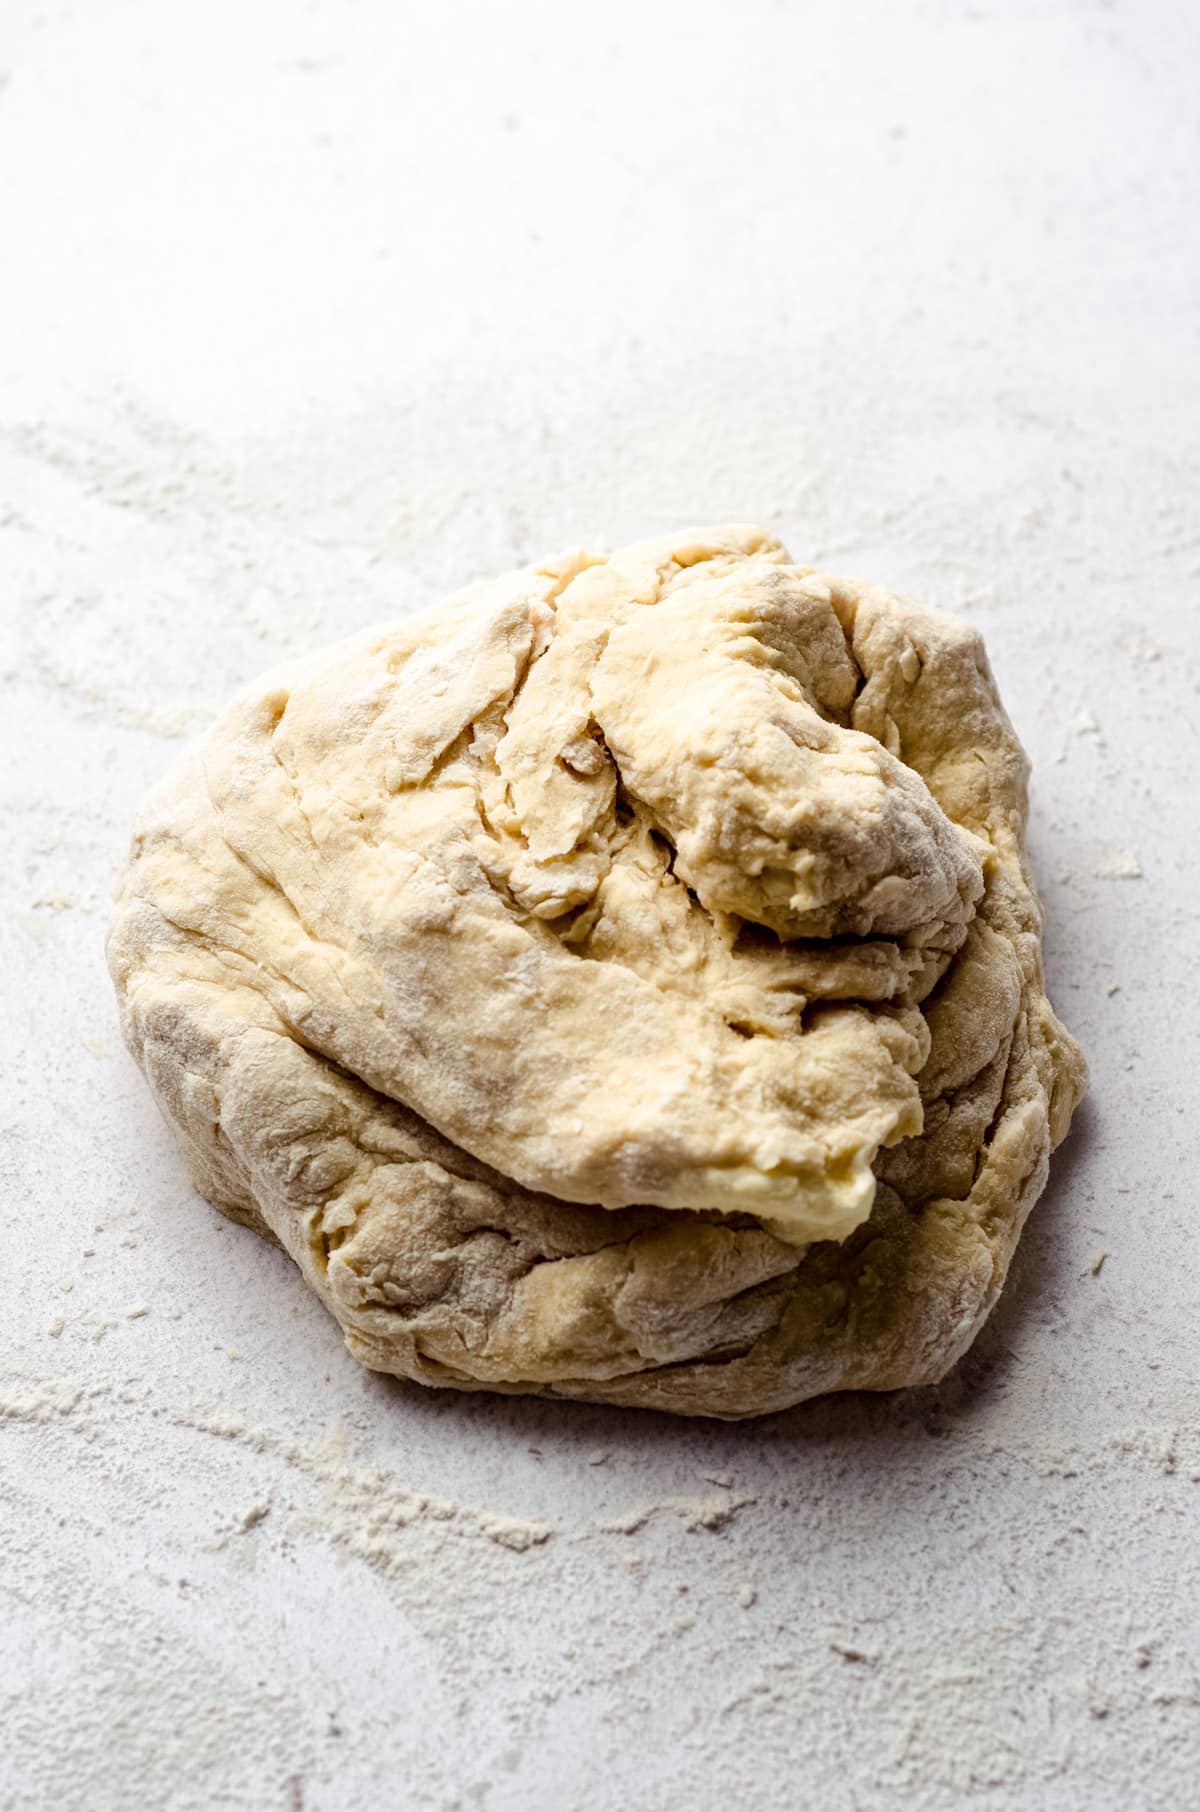 Enriched yeast dough on a white surface.